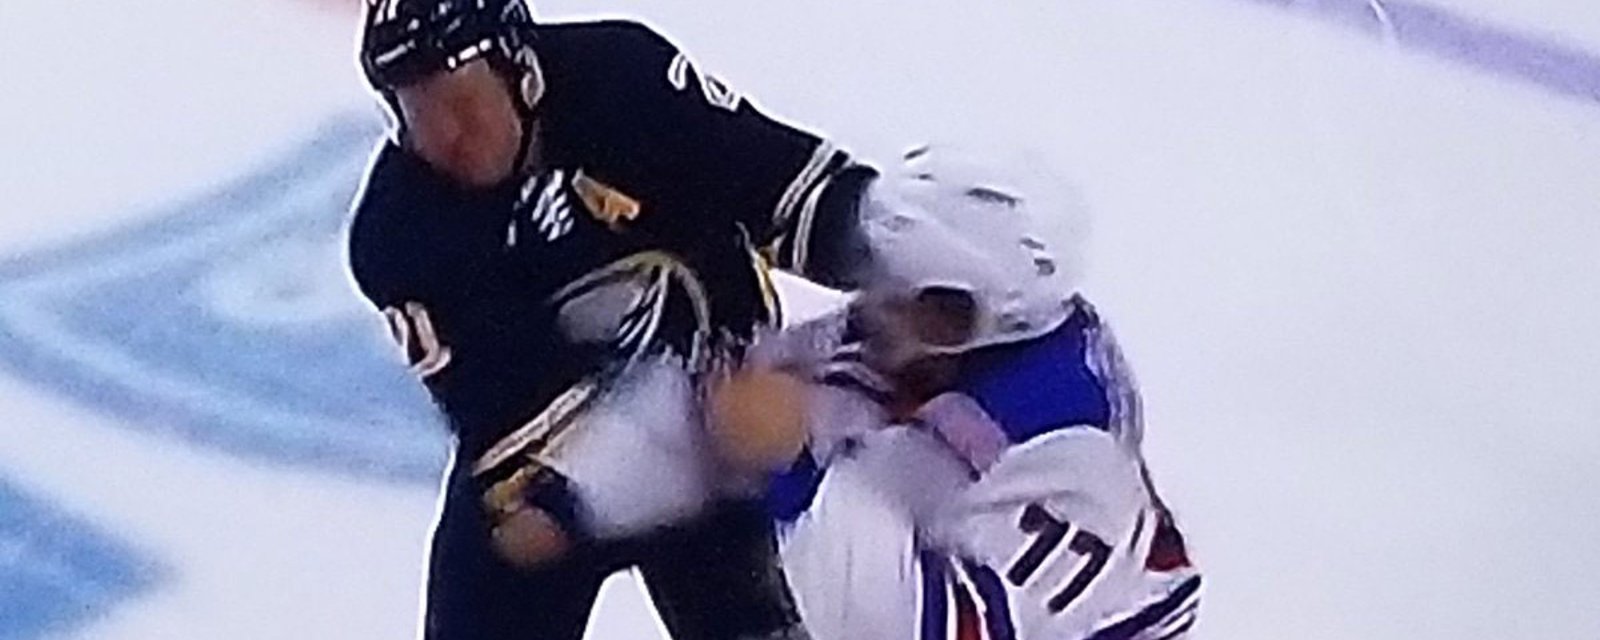 Breaking: Okposo gets knocked out with one punch and leaves the game with bloody face! 